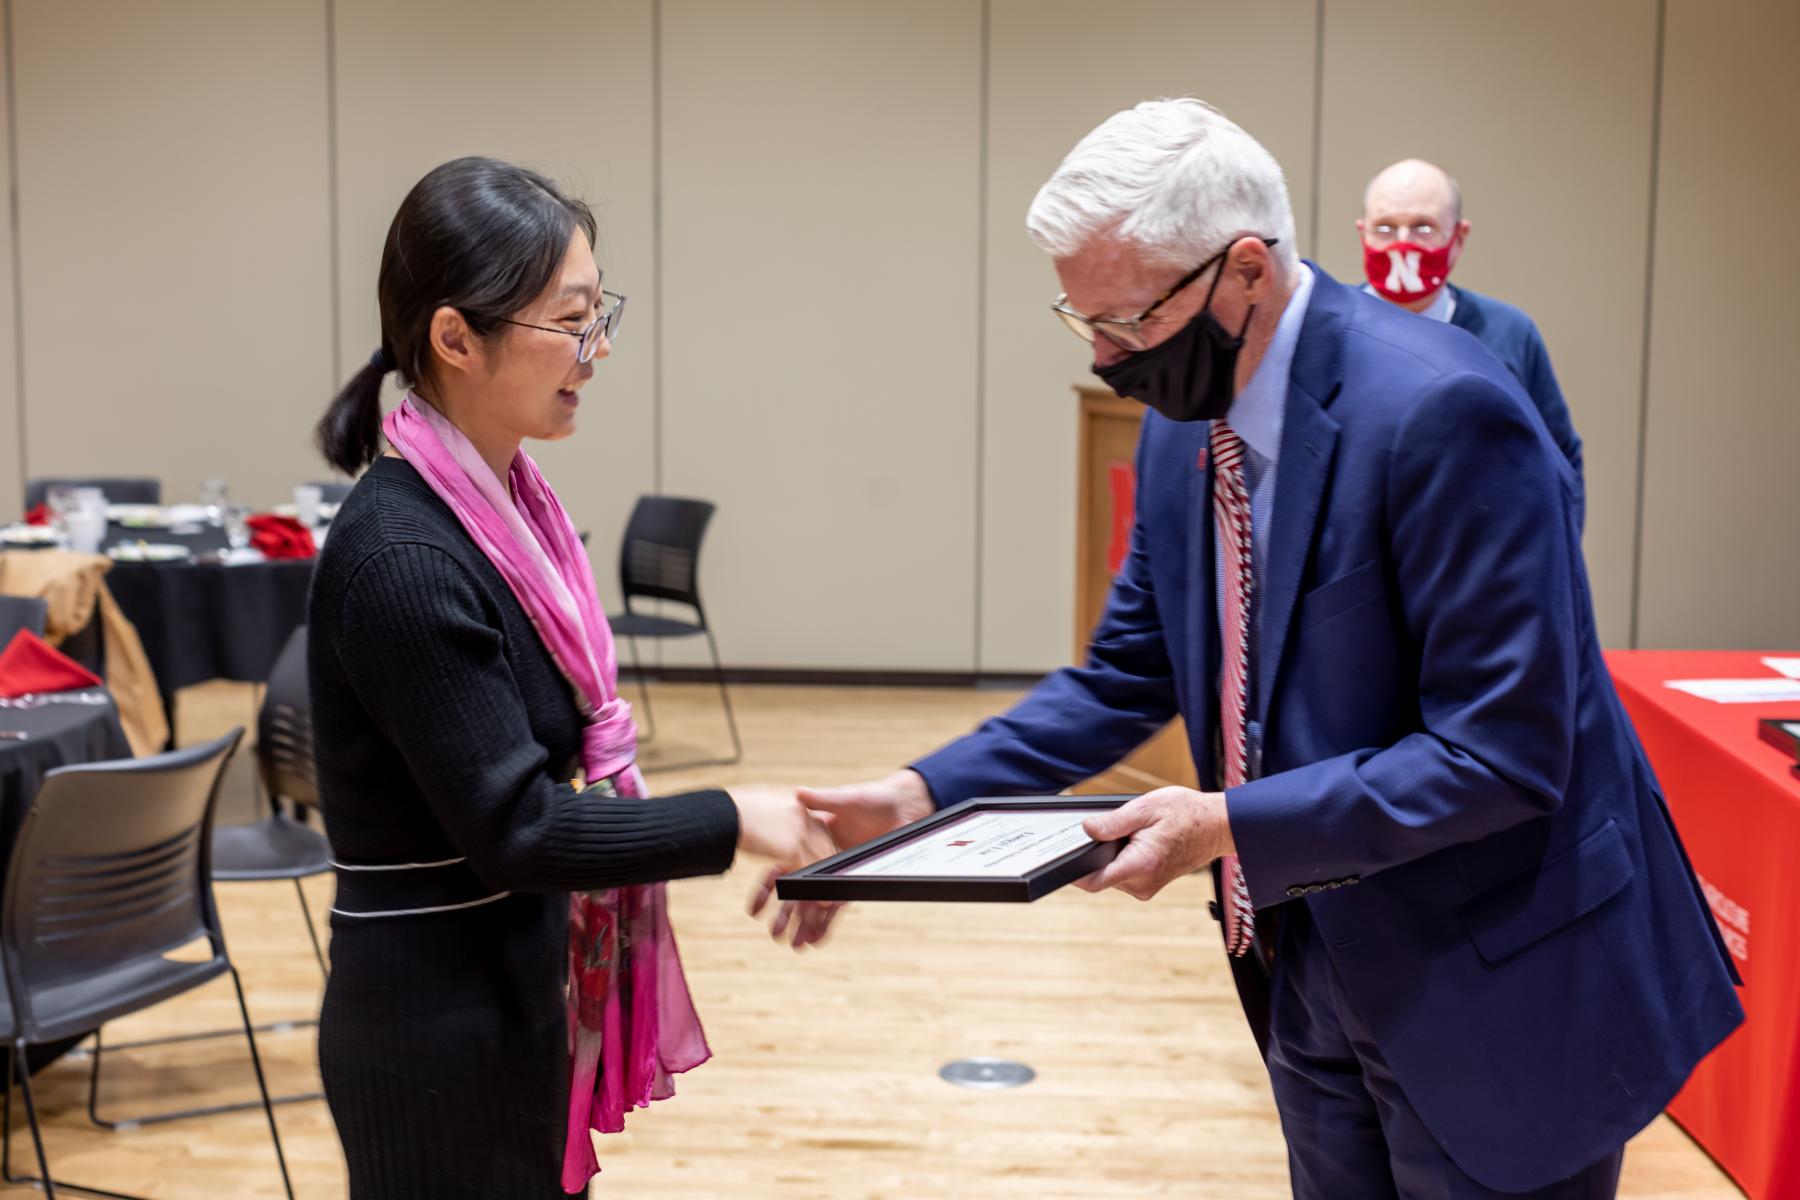 Lingyi receiving her 2021 Skala Fellowship certificate from Dr. Archie Clutter, Dean of UNL's Agricultural Research Division